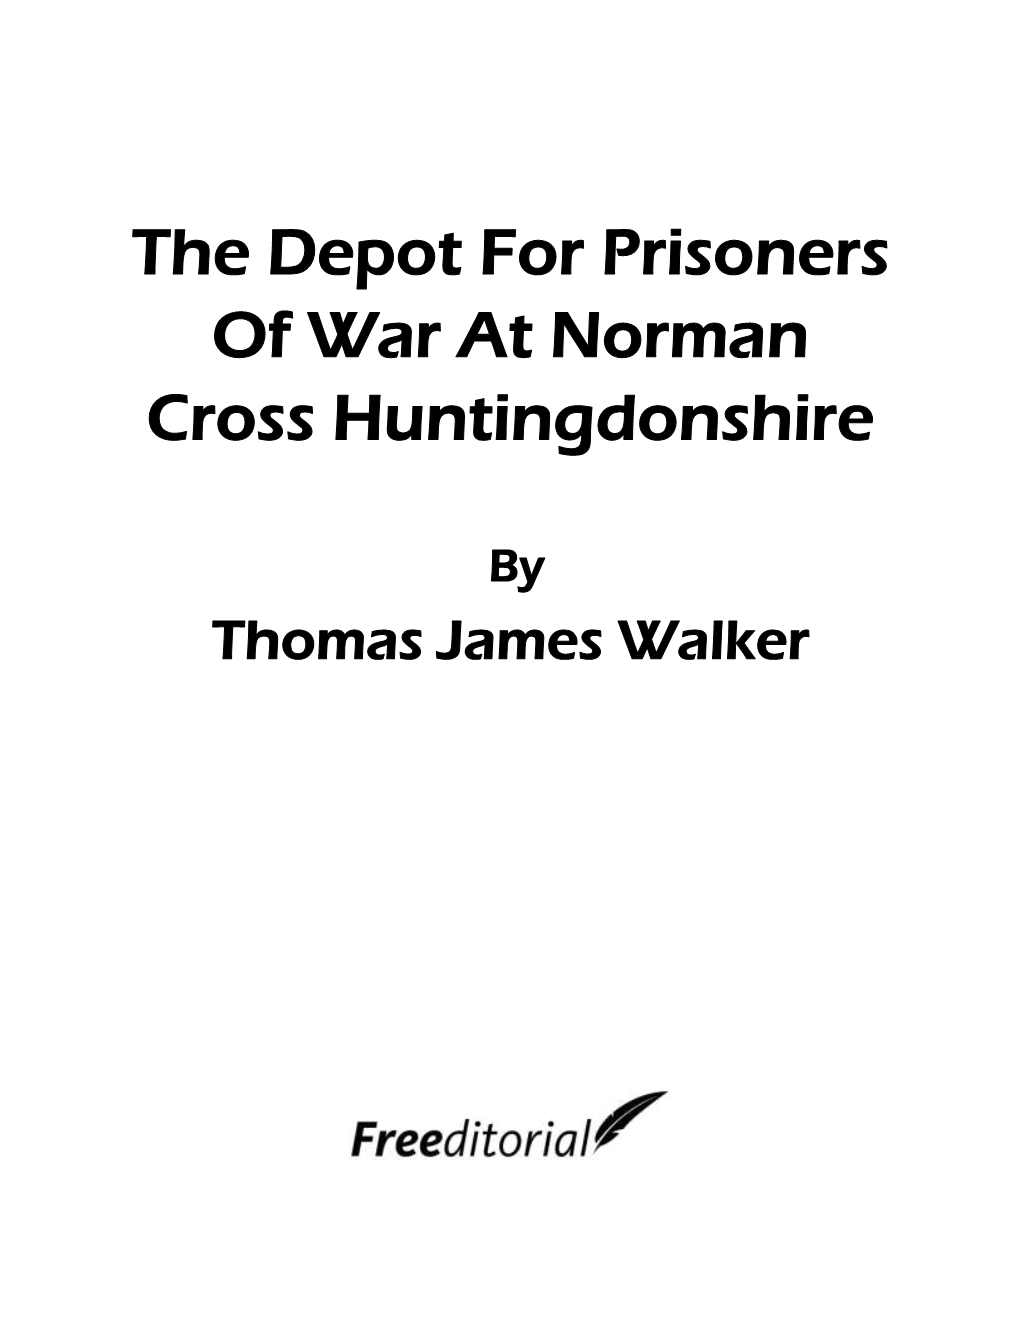 The Depot for Prisoners of War at Norman Cross Huntingdonshire